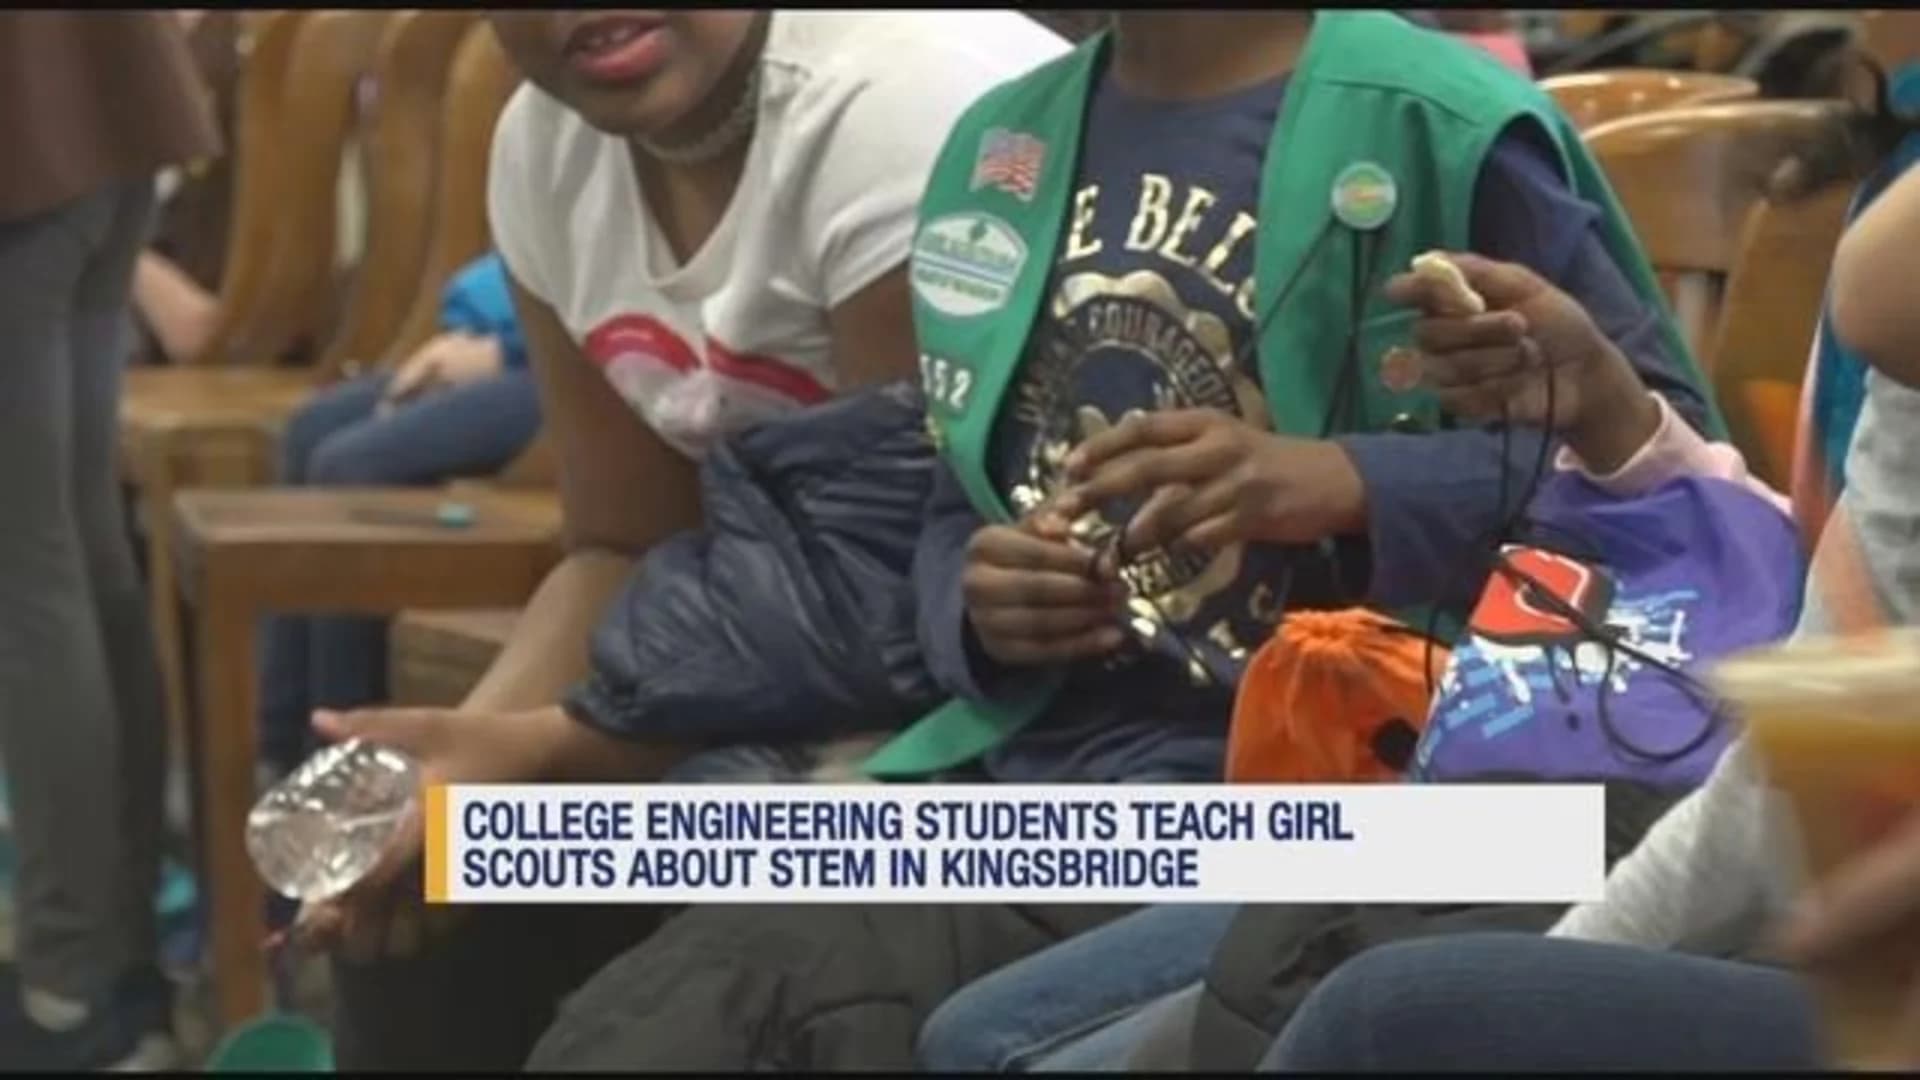 150 Girl Scouts learn about sciences at STEM event